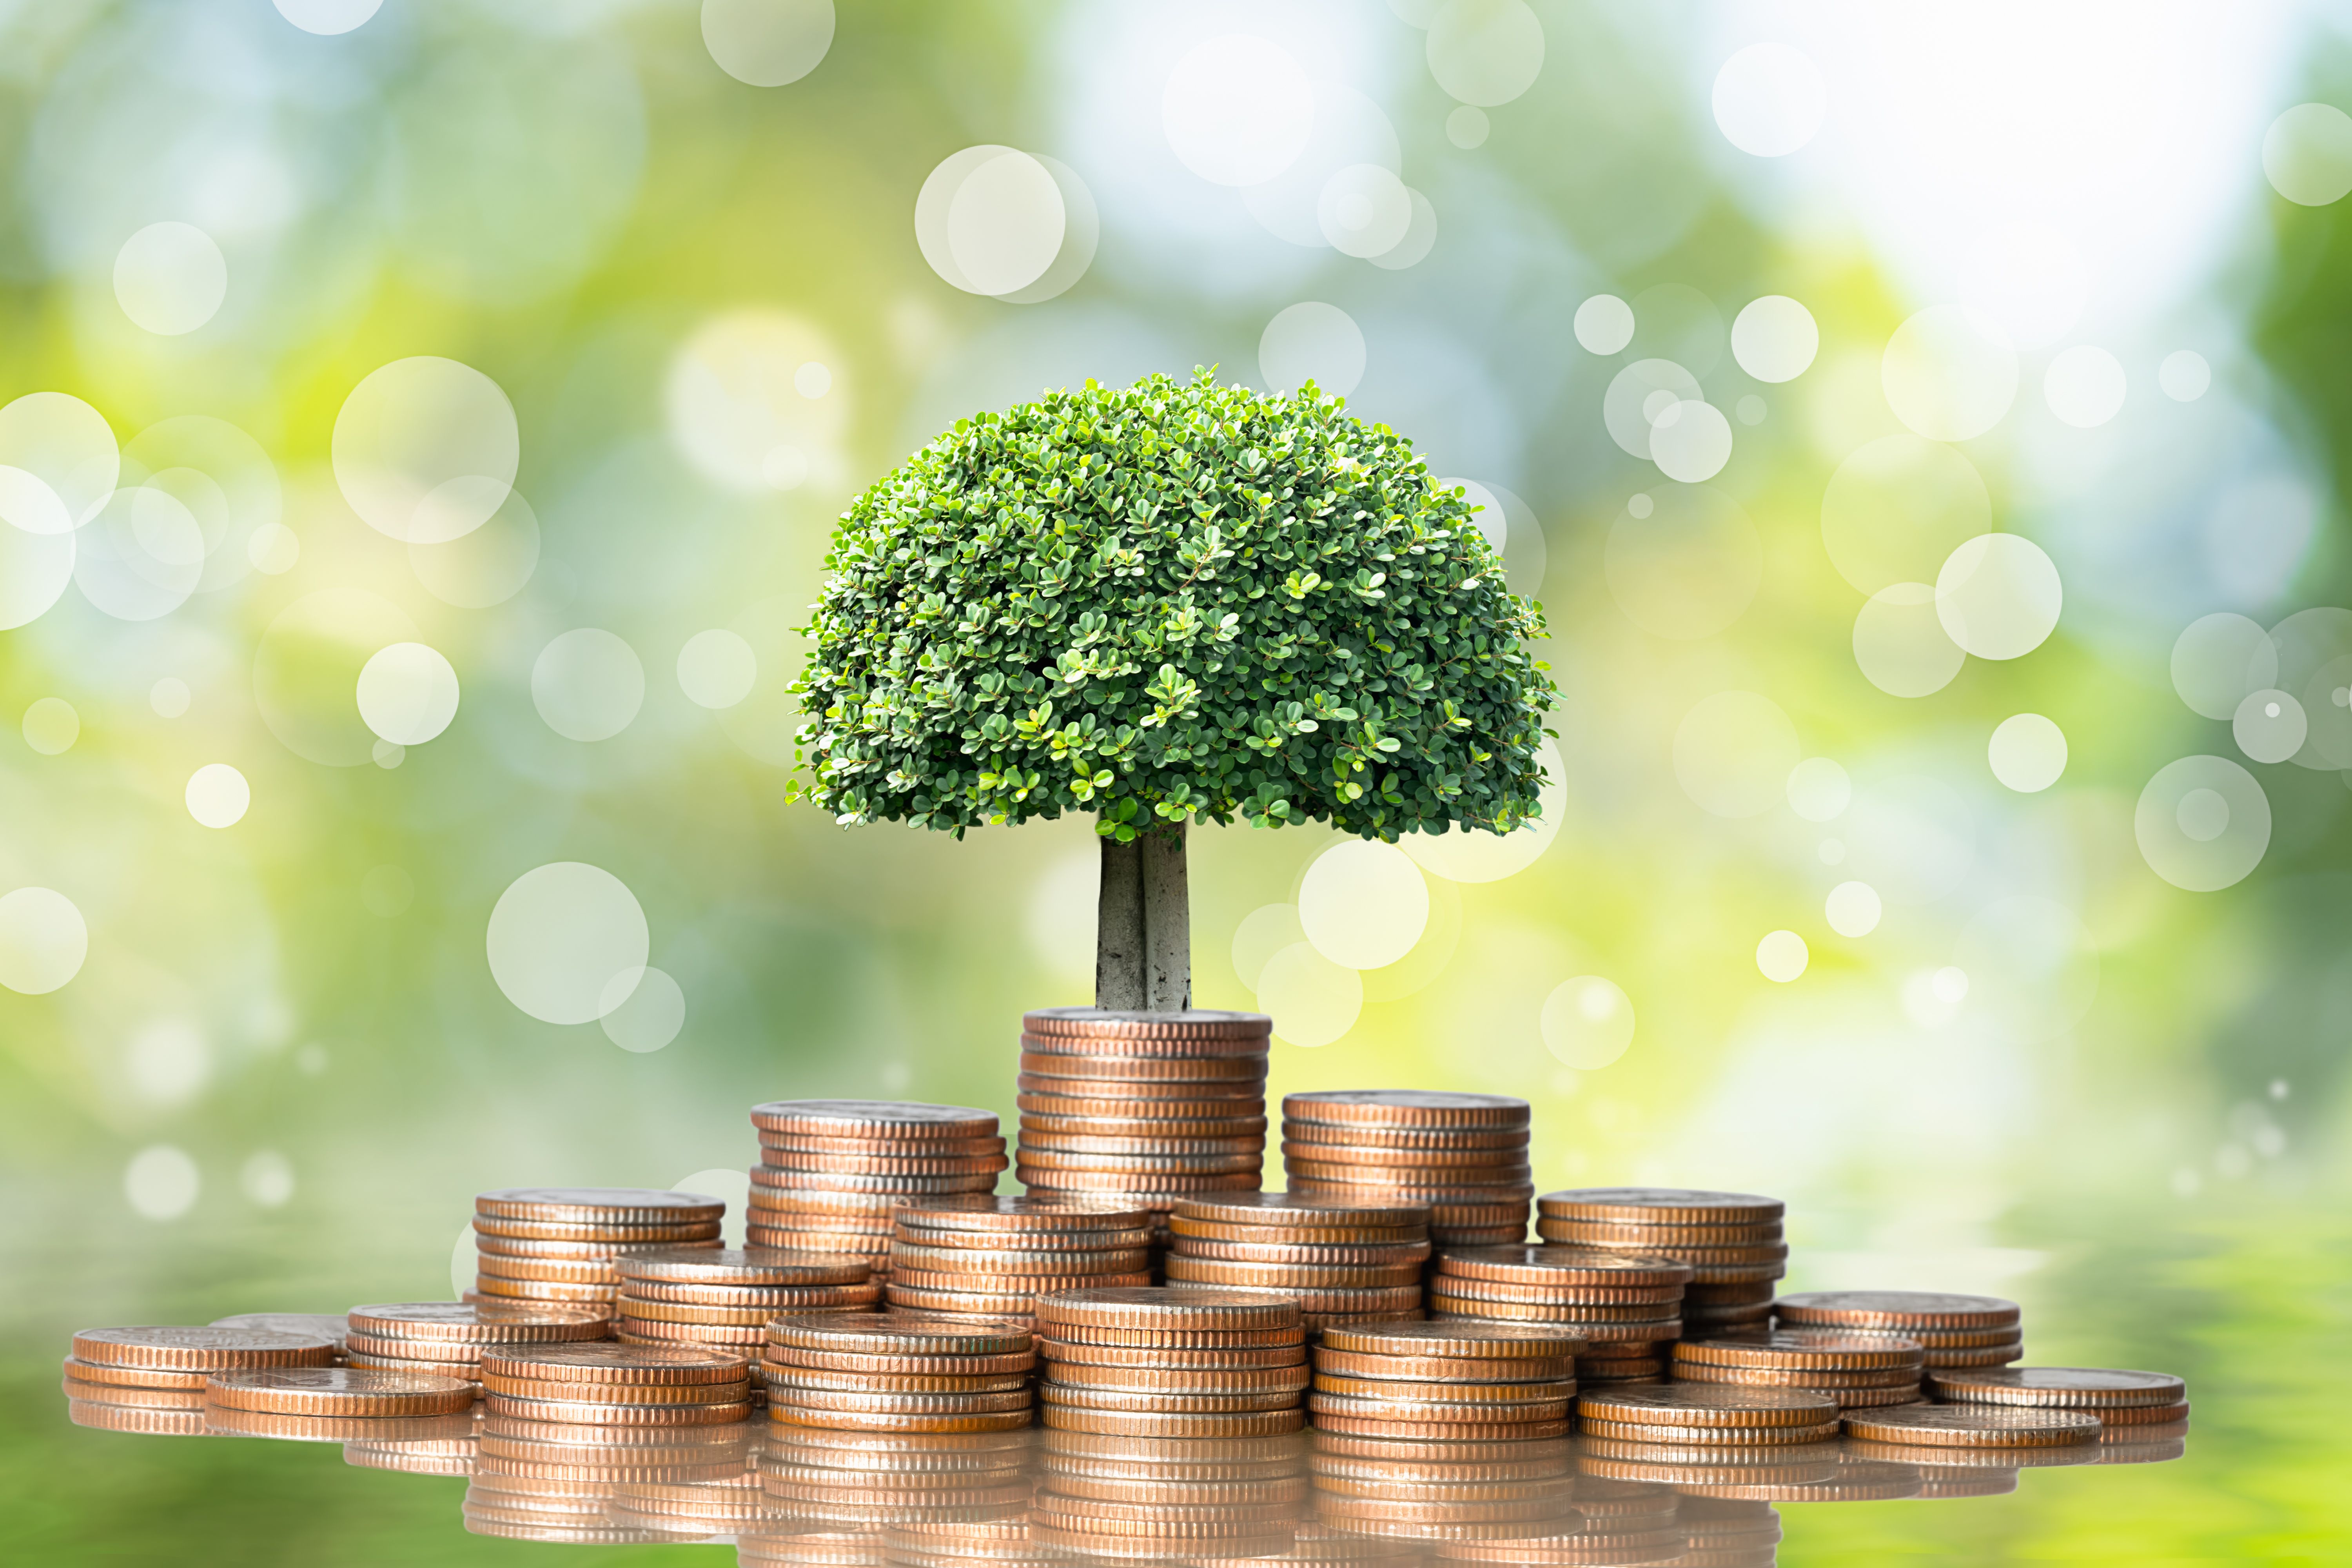 A row of coins in front of a small tree suggesting positive growth